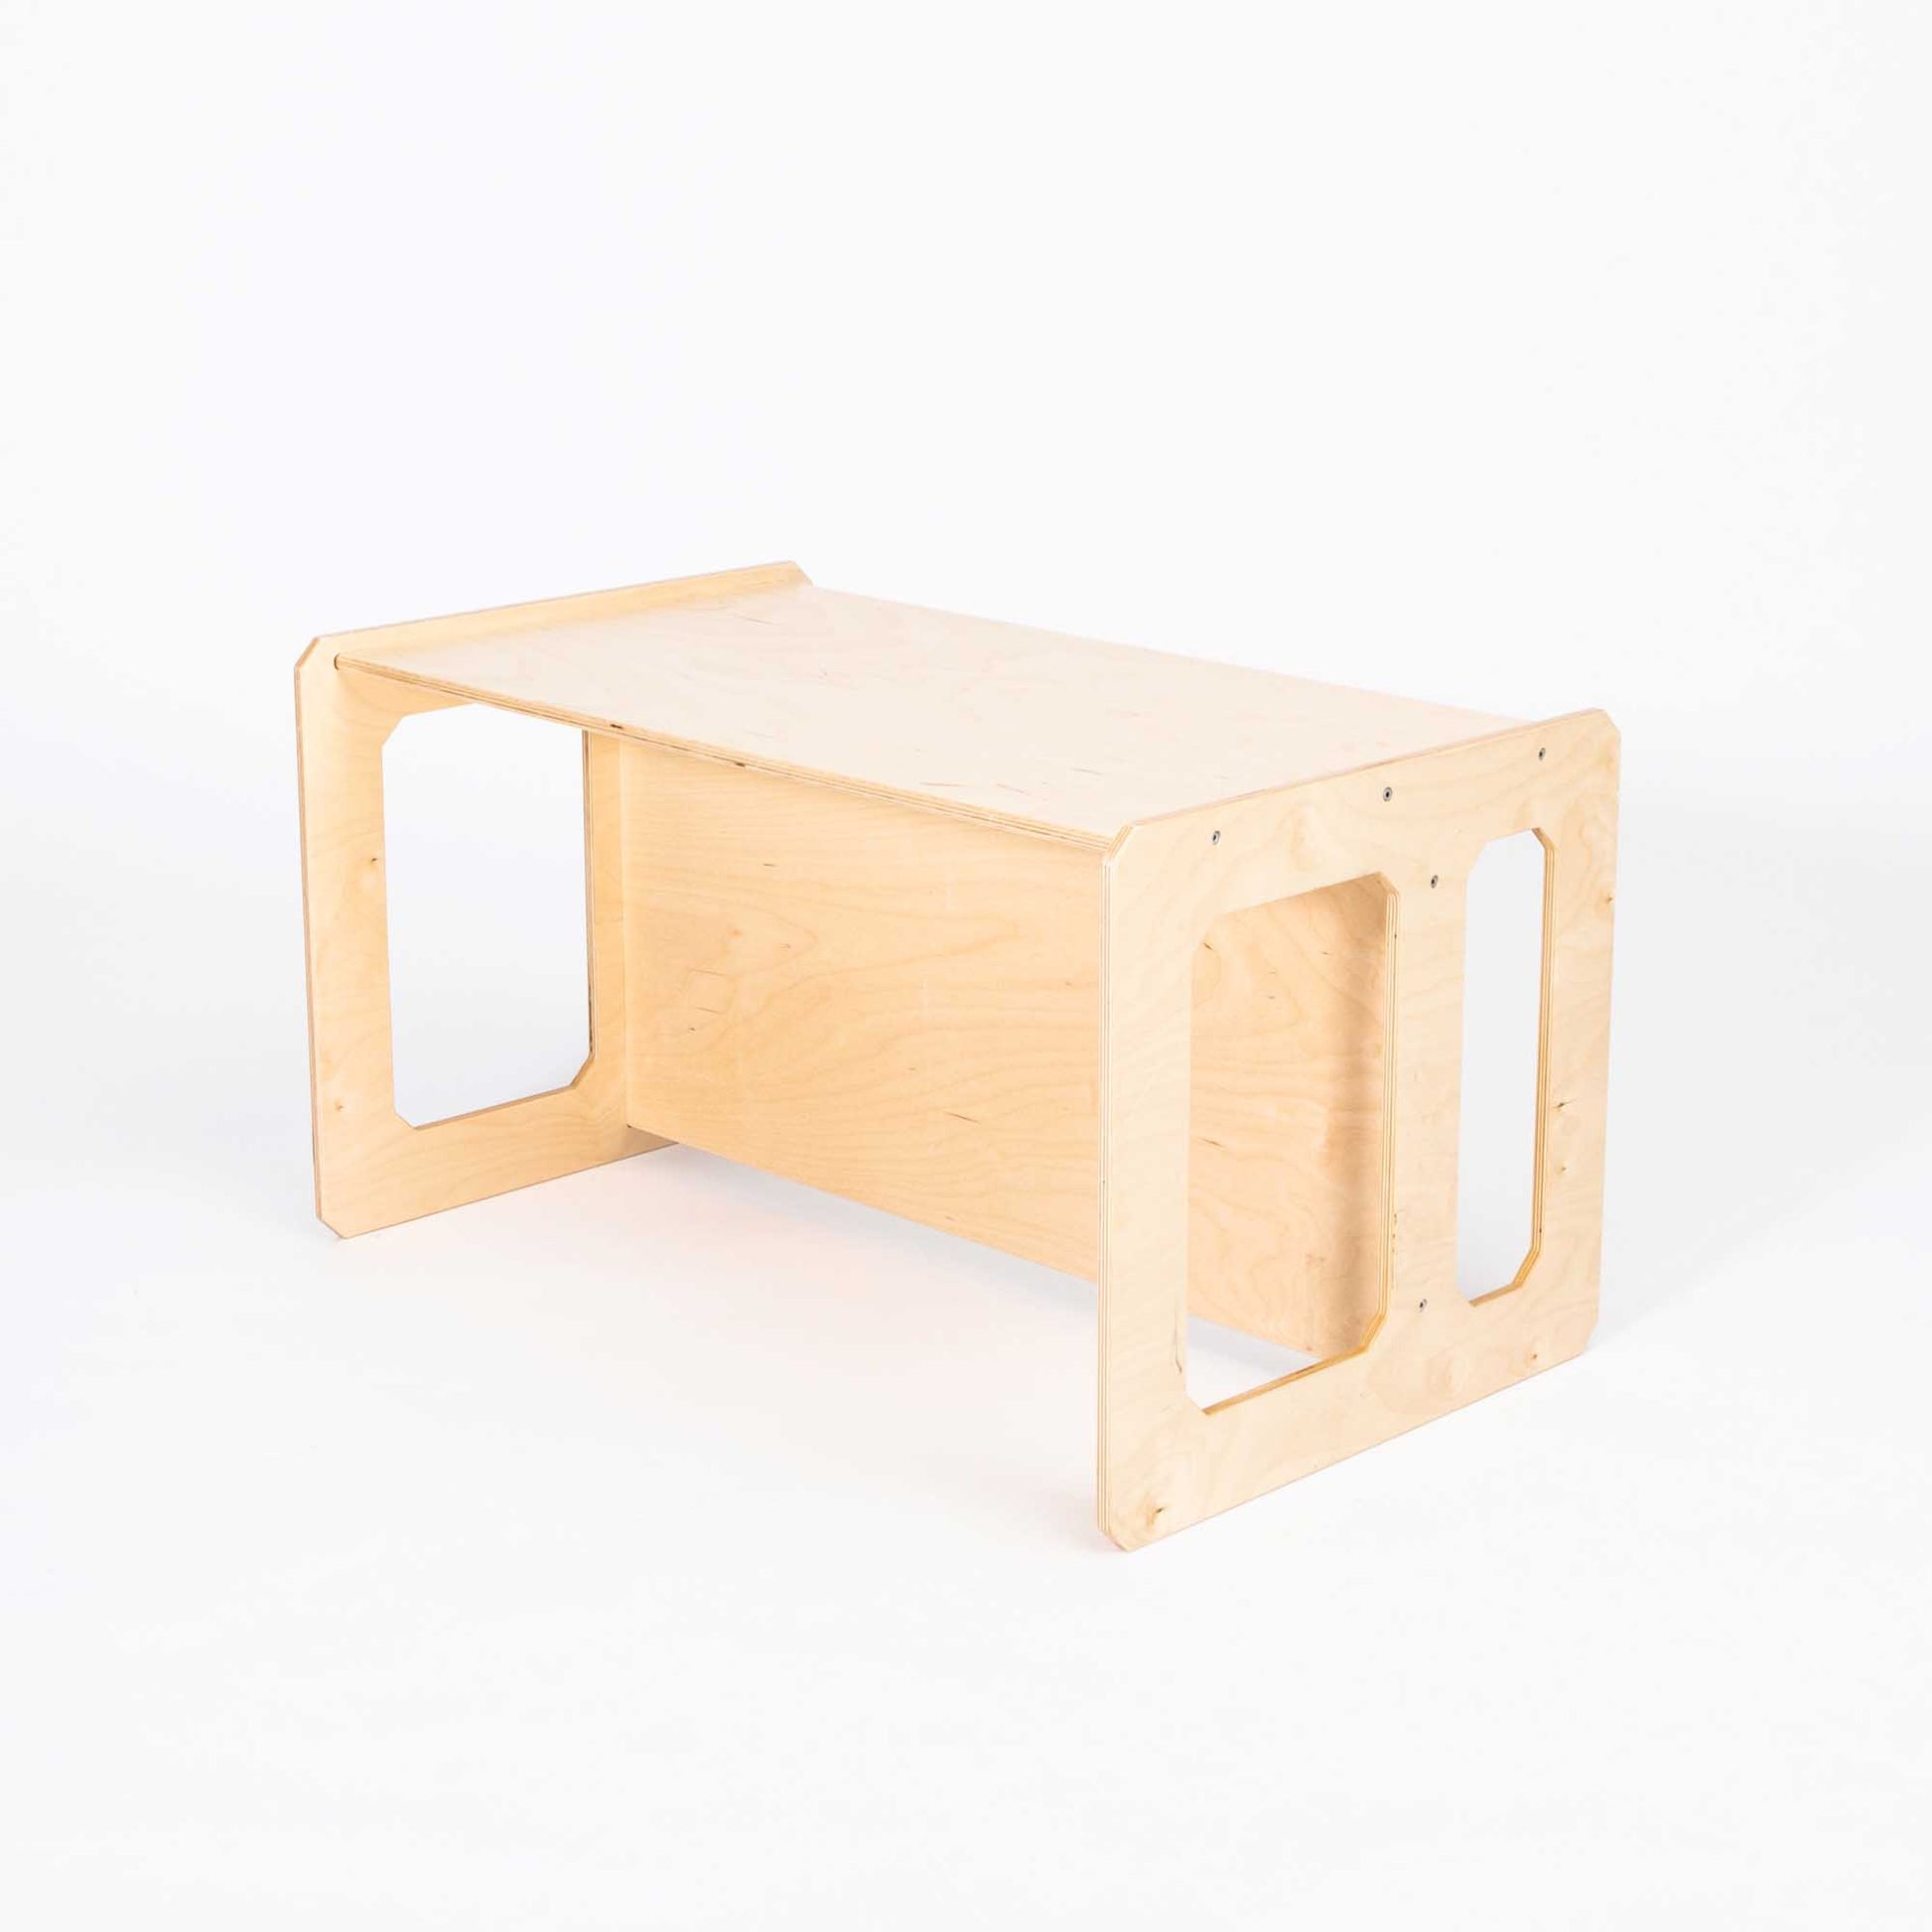 A Montessori weaning table from Sweet Home From Wood on a white background.